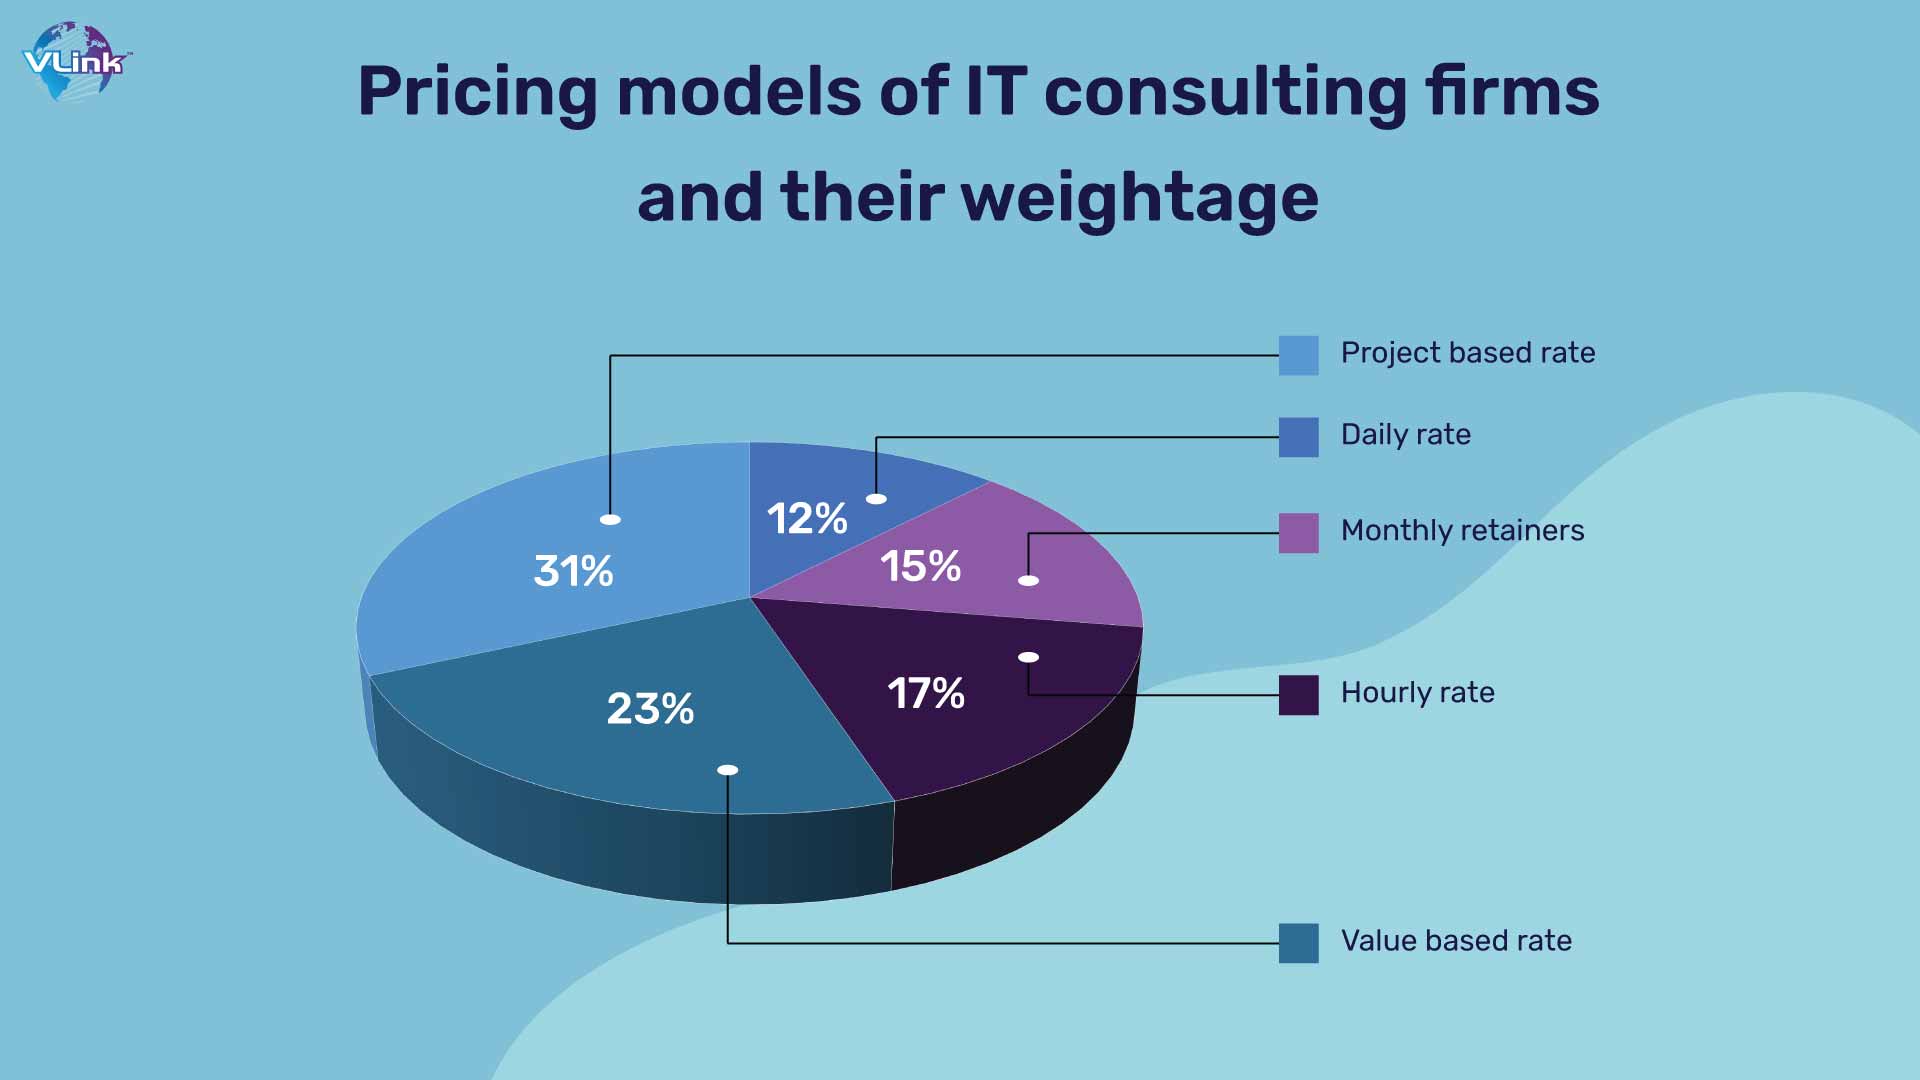 Pricing models of IT consulting firms and their weightage